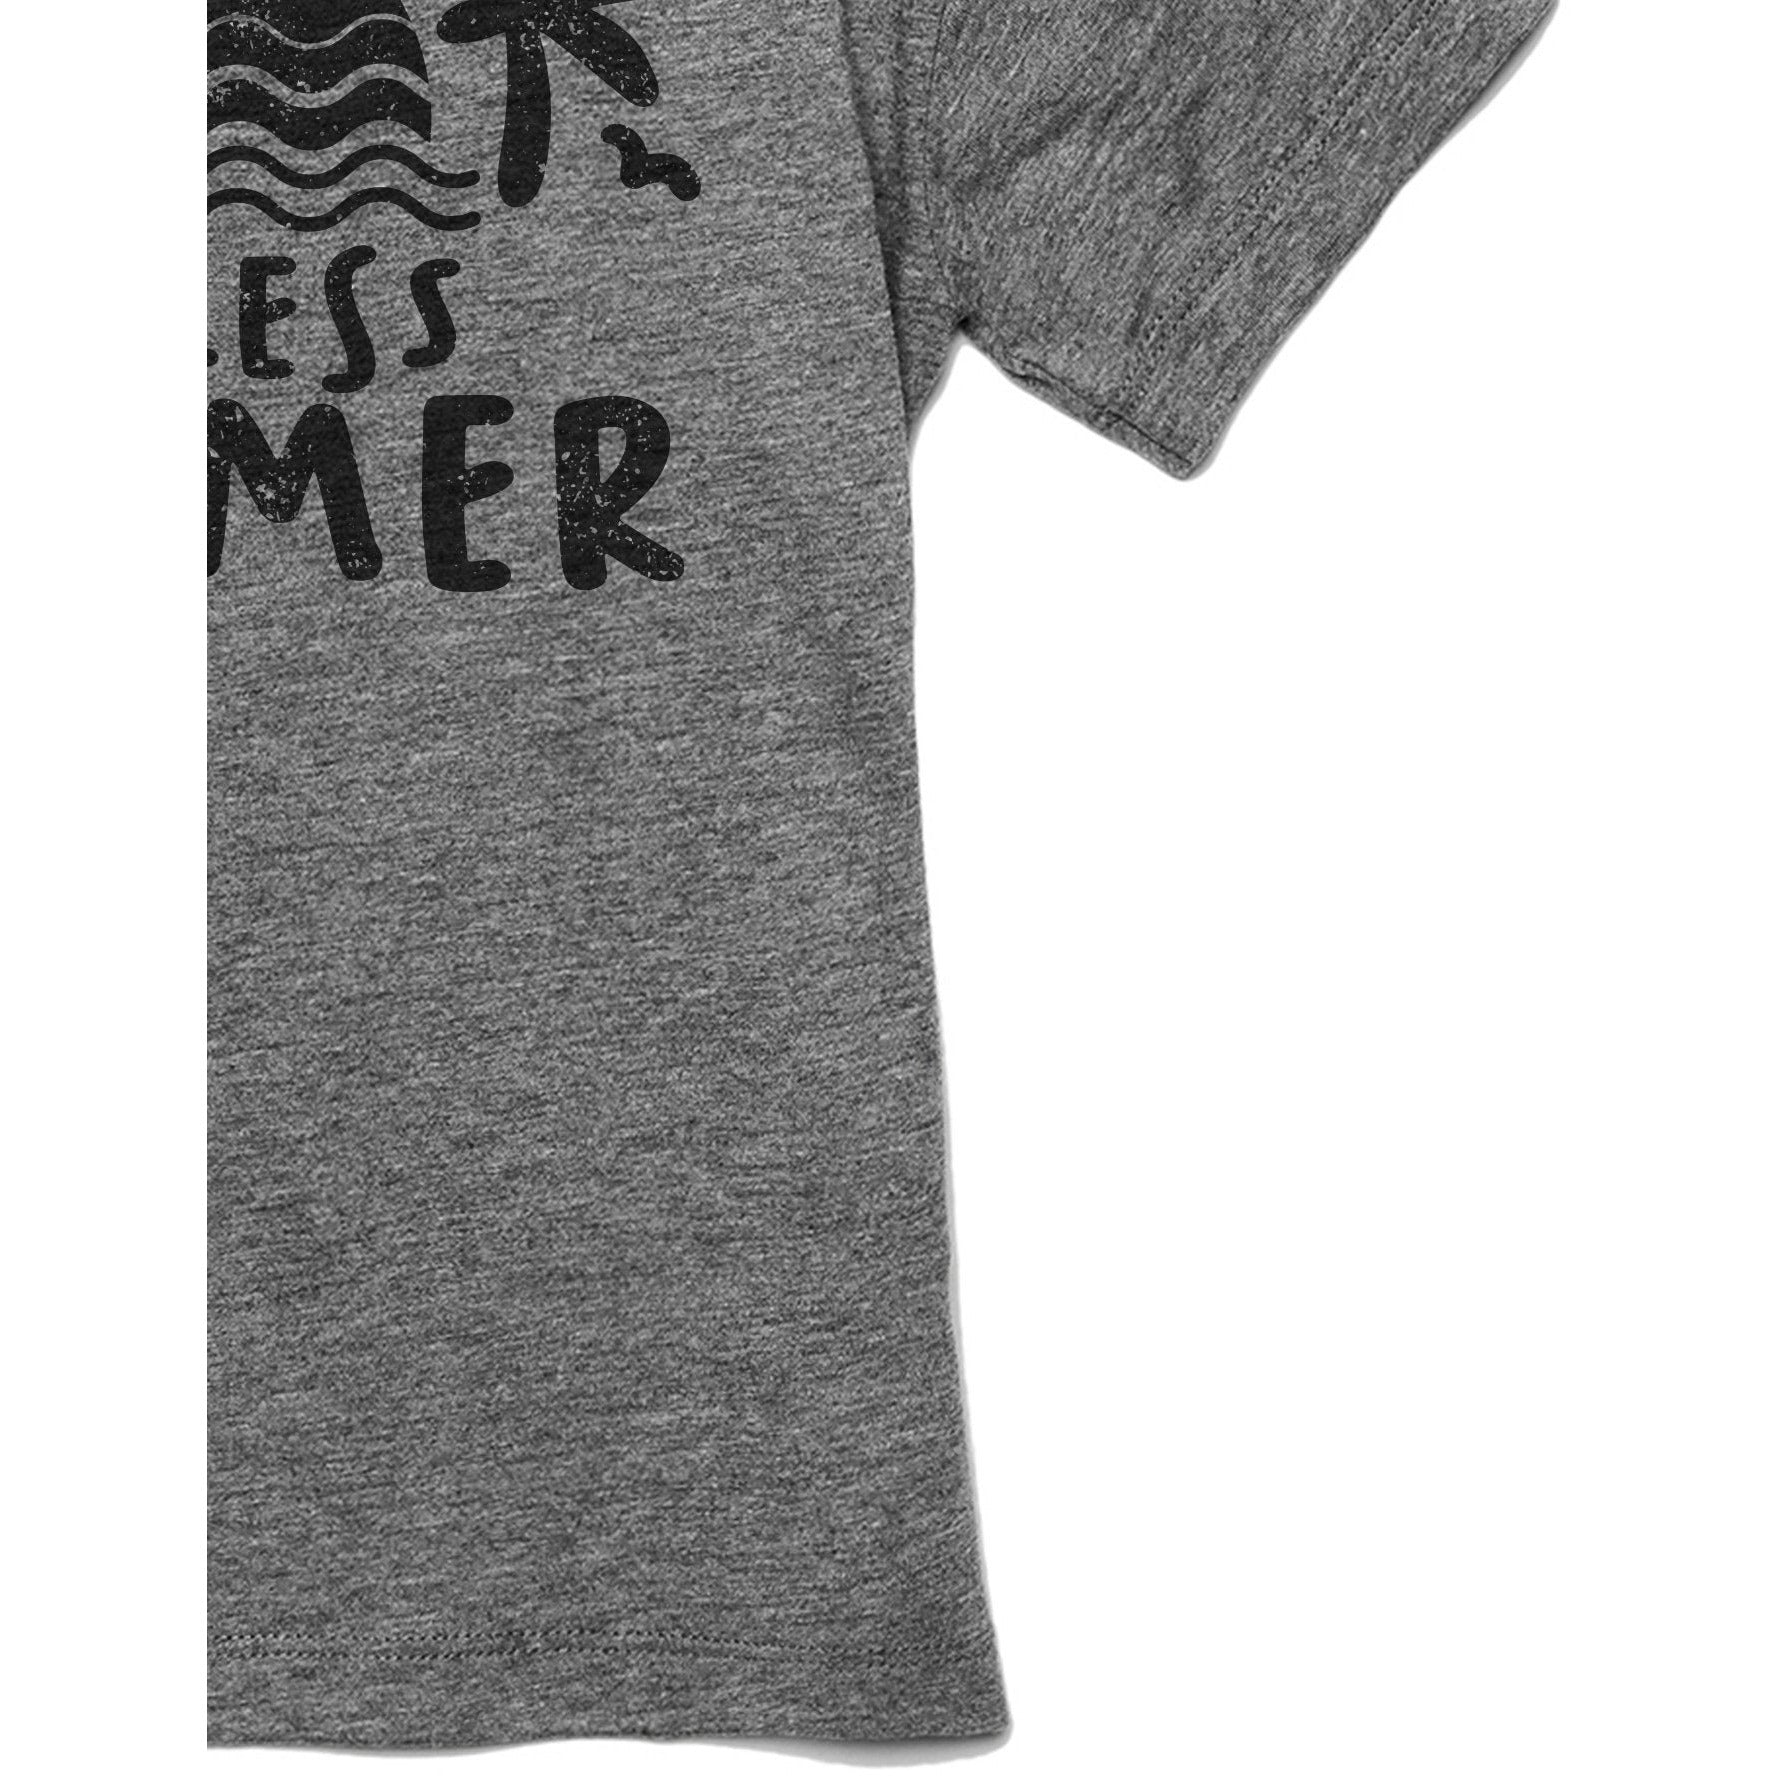 Endless Summer Toddler's Go-To Crewneck Tee Heather Grey Zoom Details B